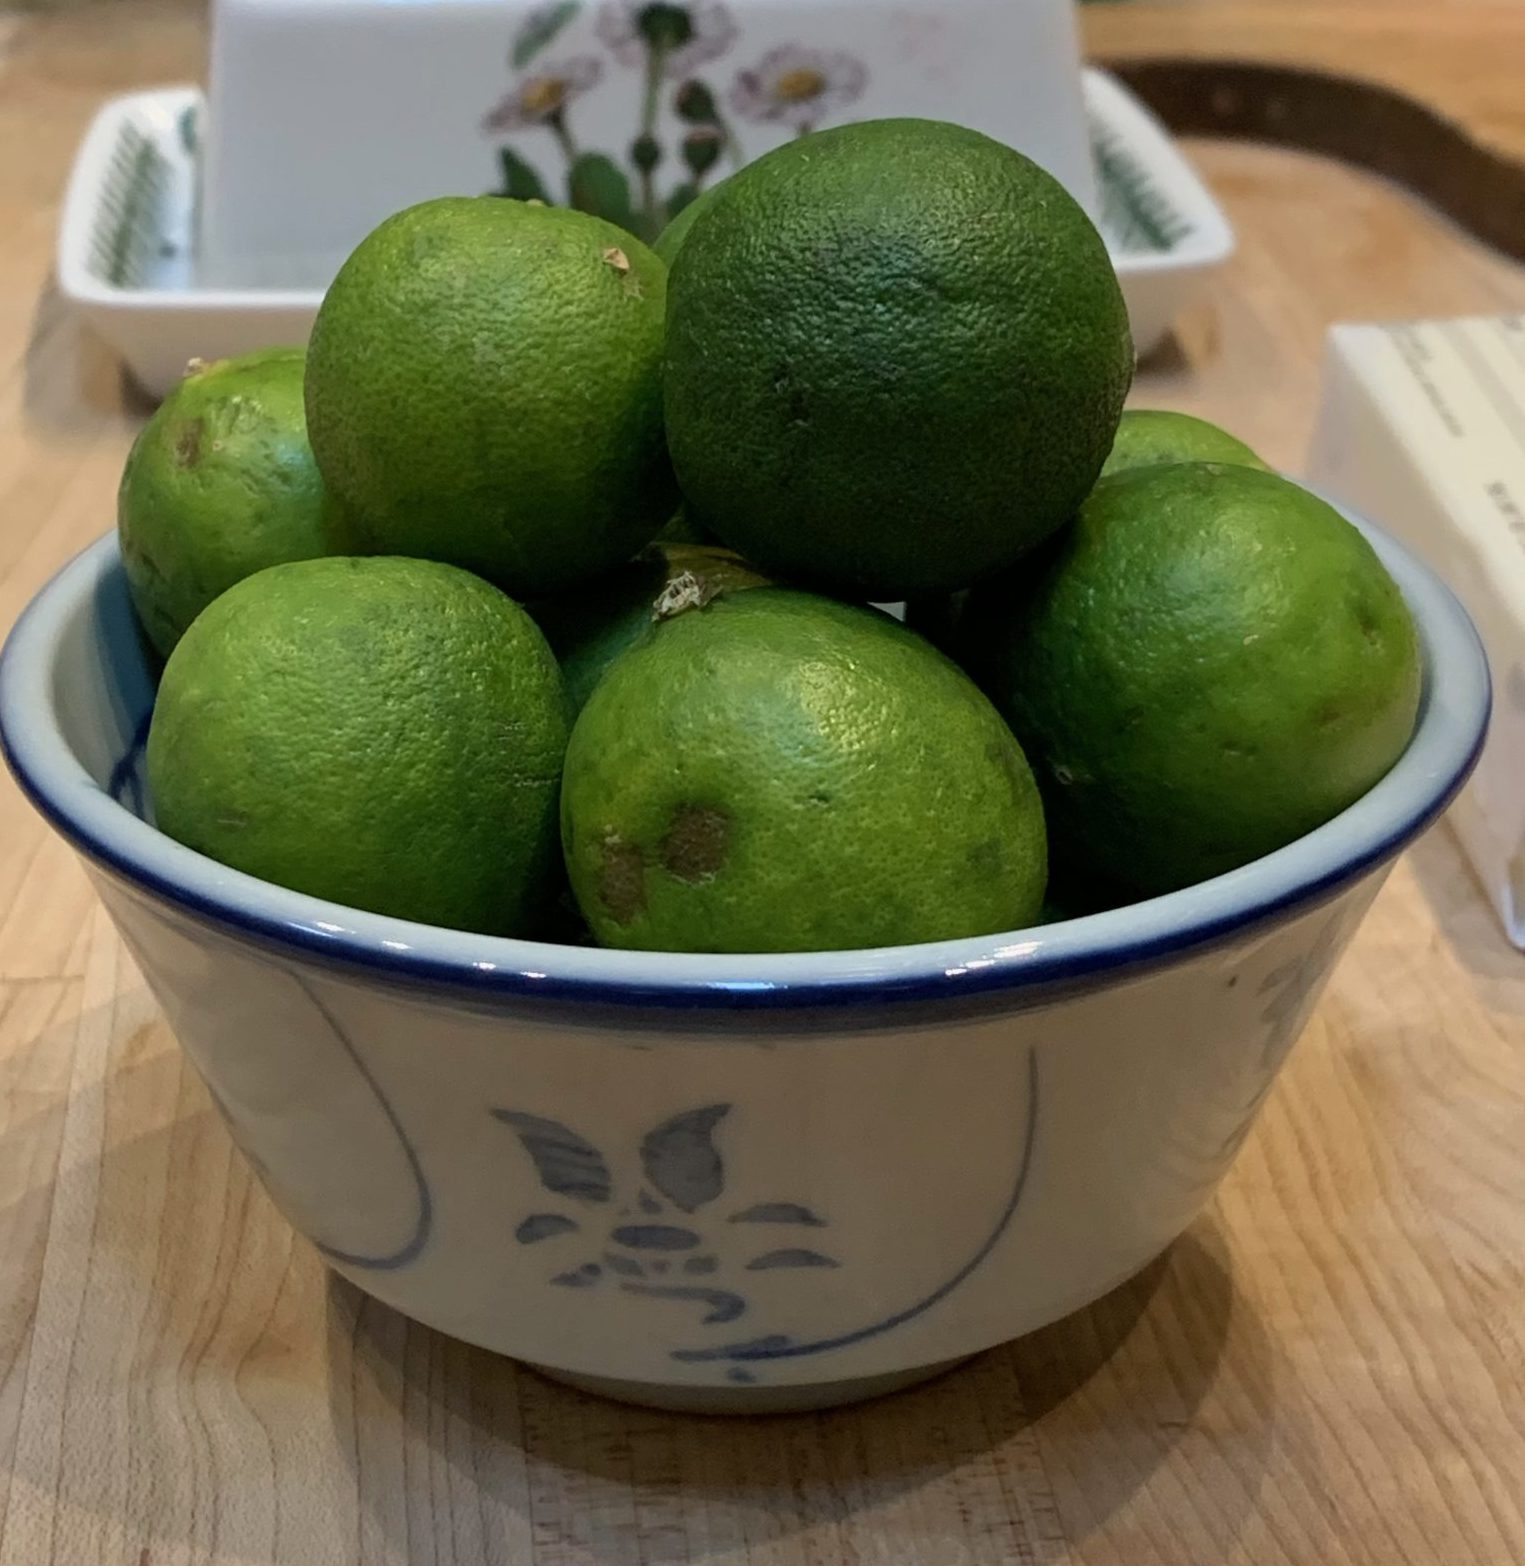 Showing small Key Limes